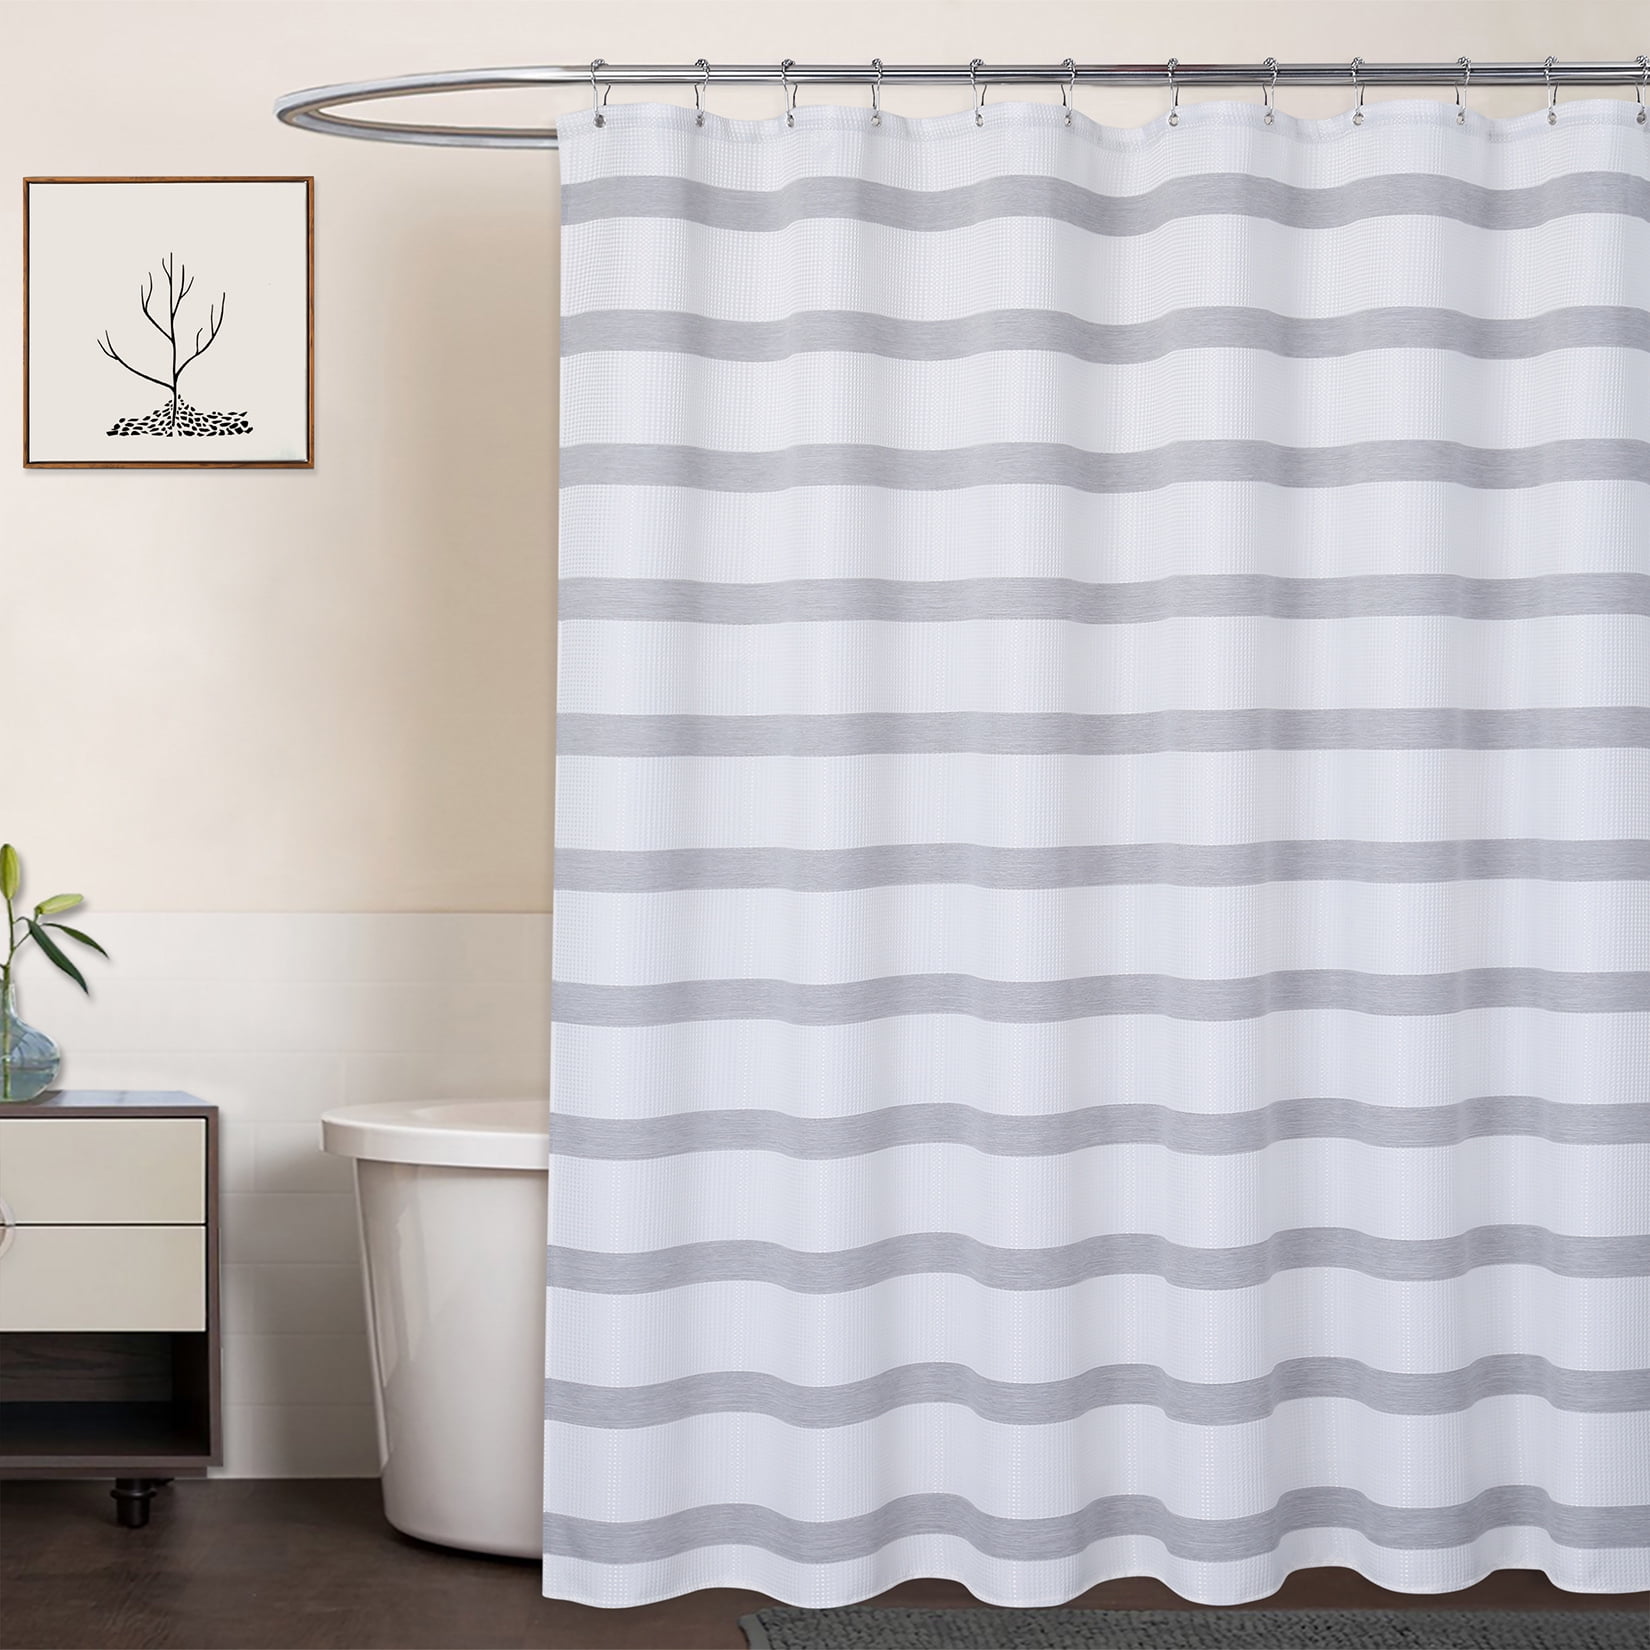 Details about   Waterproof Fabric Shower Curtain Grey 72 inch Length Waffle Weave Textured 